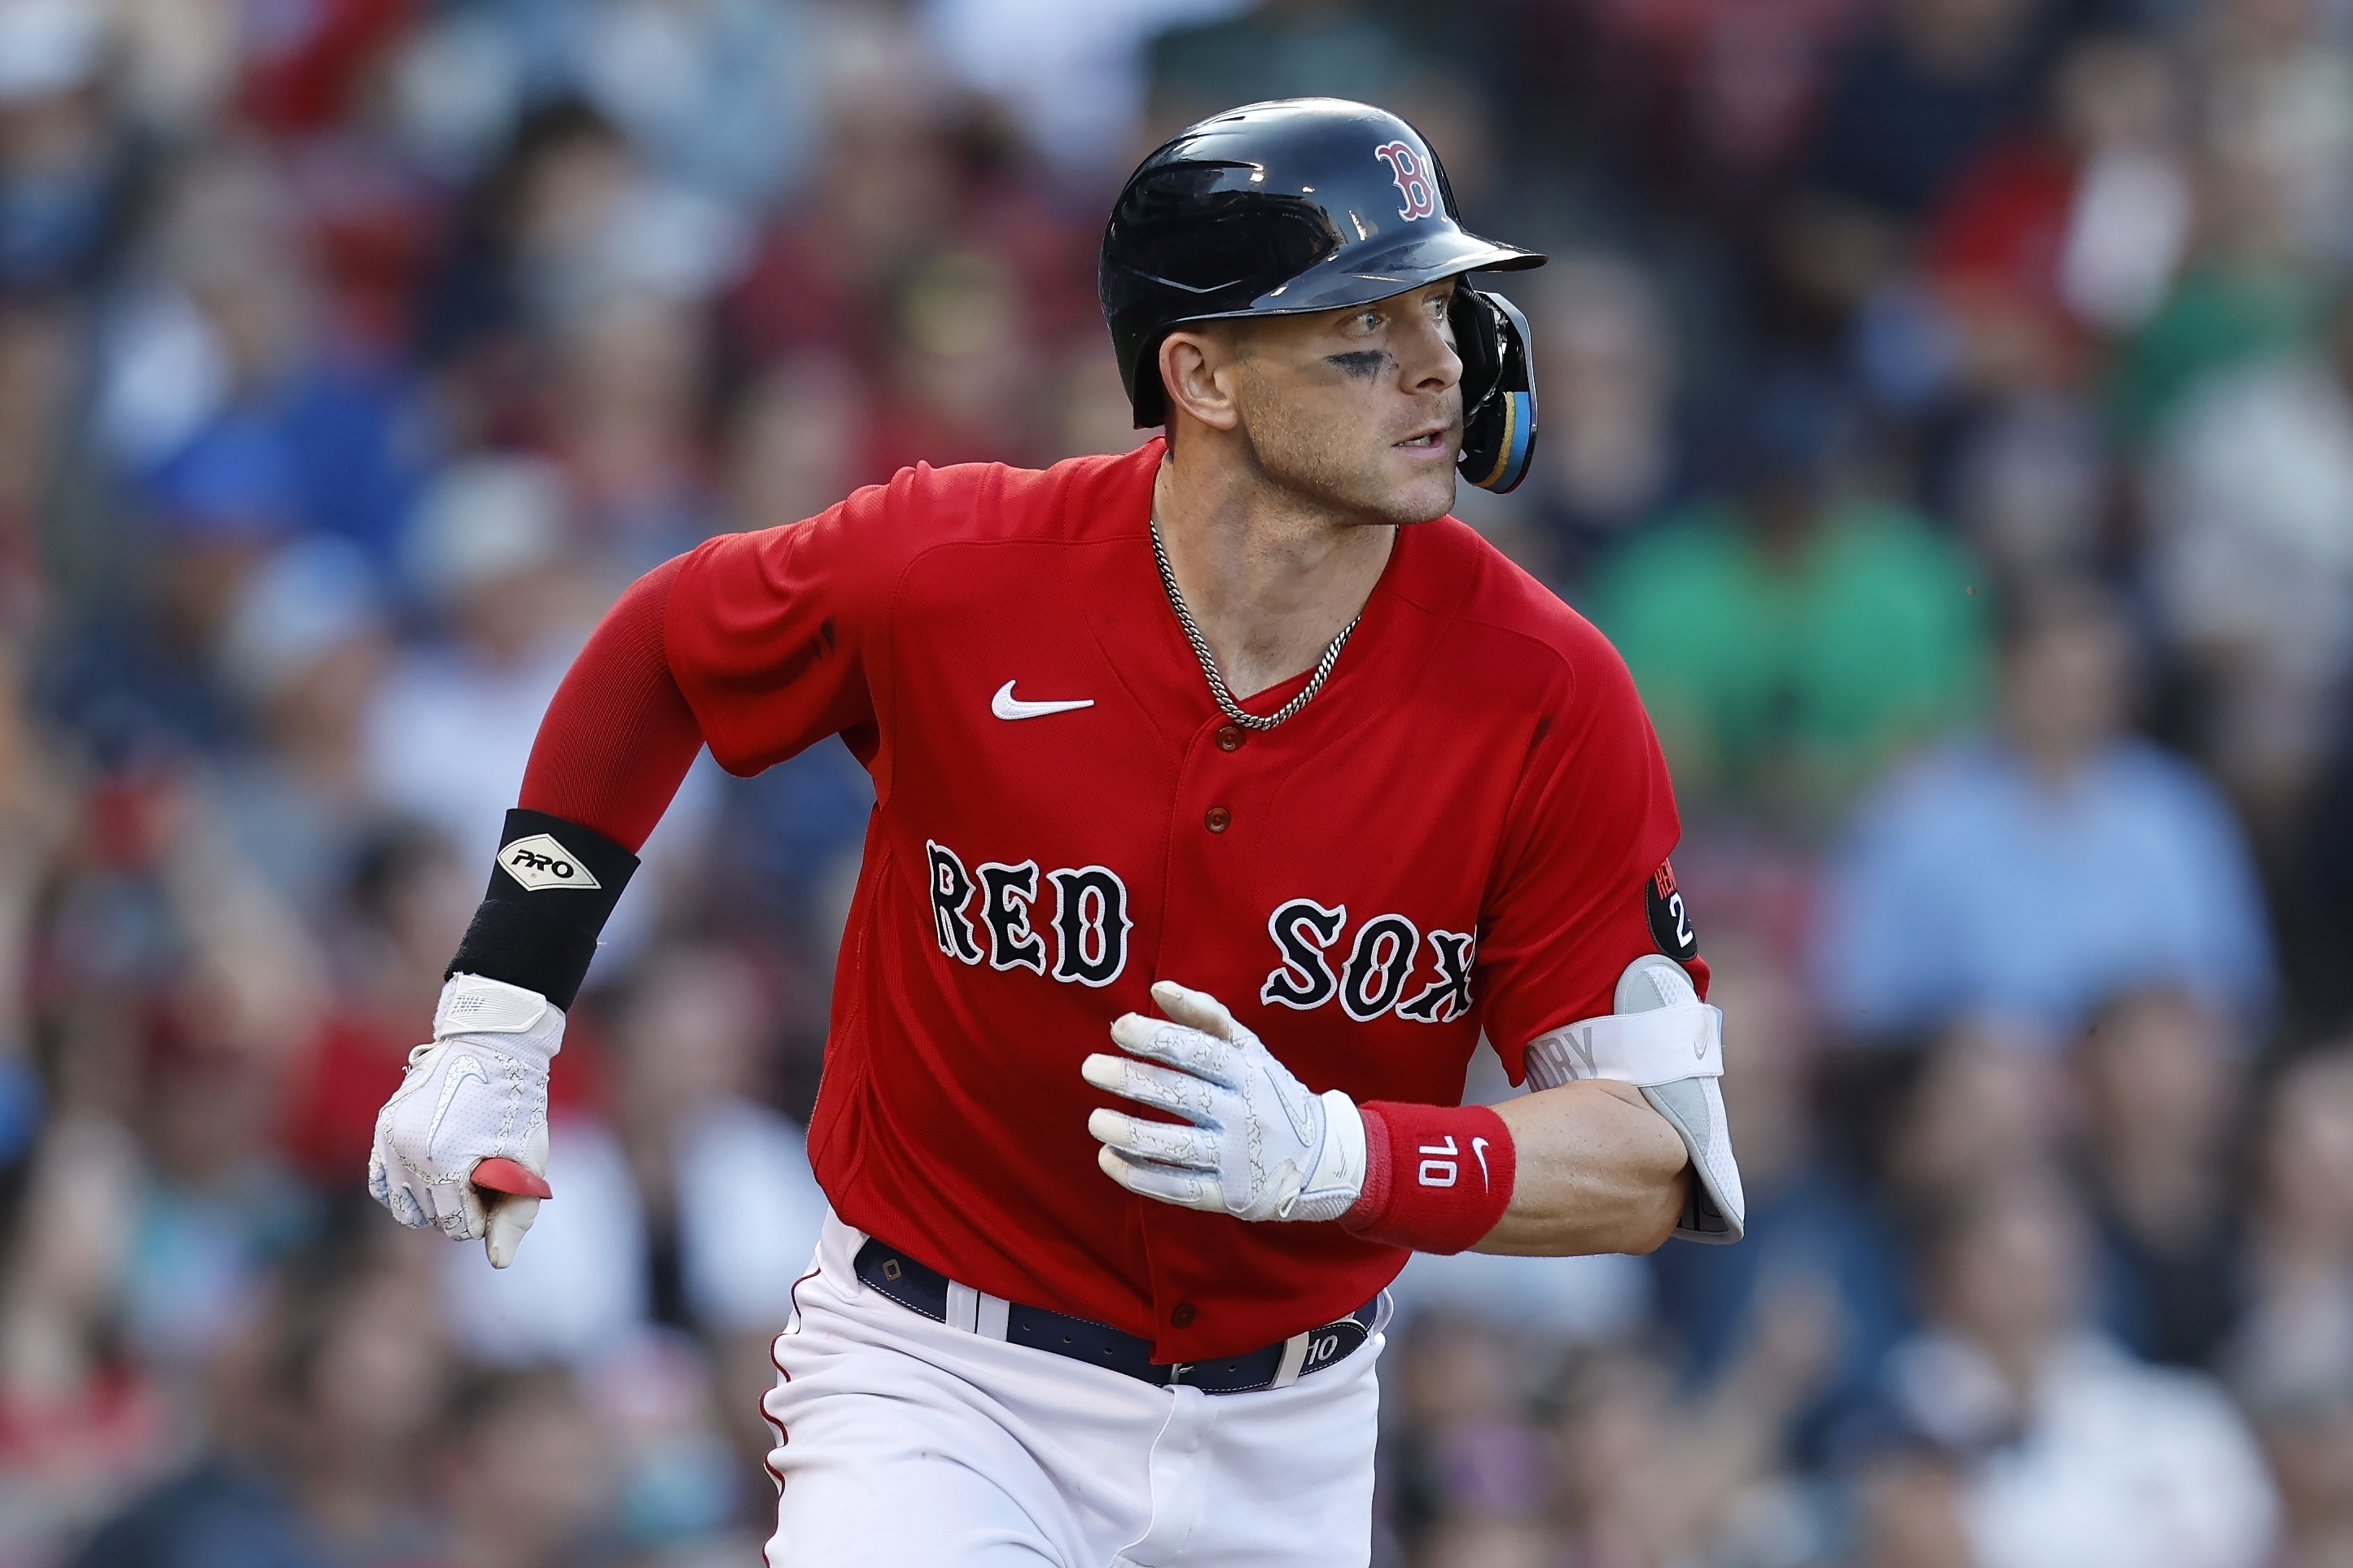 Trevor Story Boston Red Sox Unsigned Team Debut Photograph